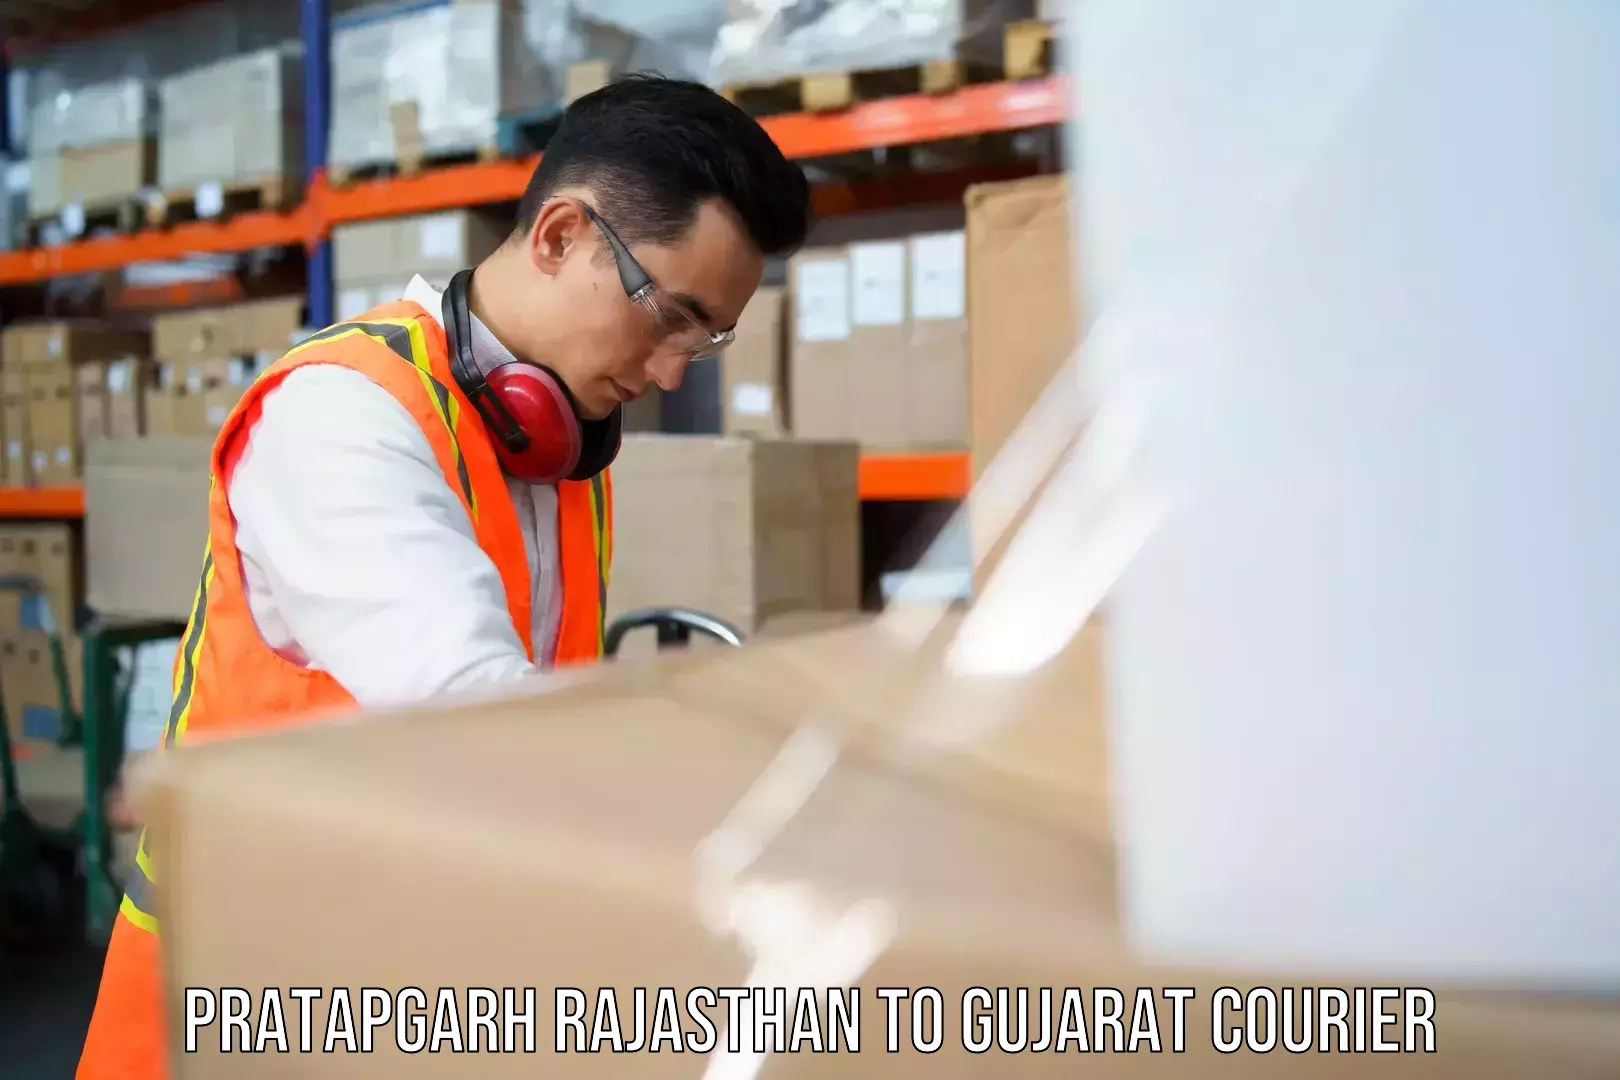 Subscription-based courier Pratapgarh Rajasthan to Sihor